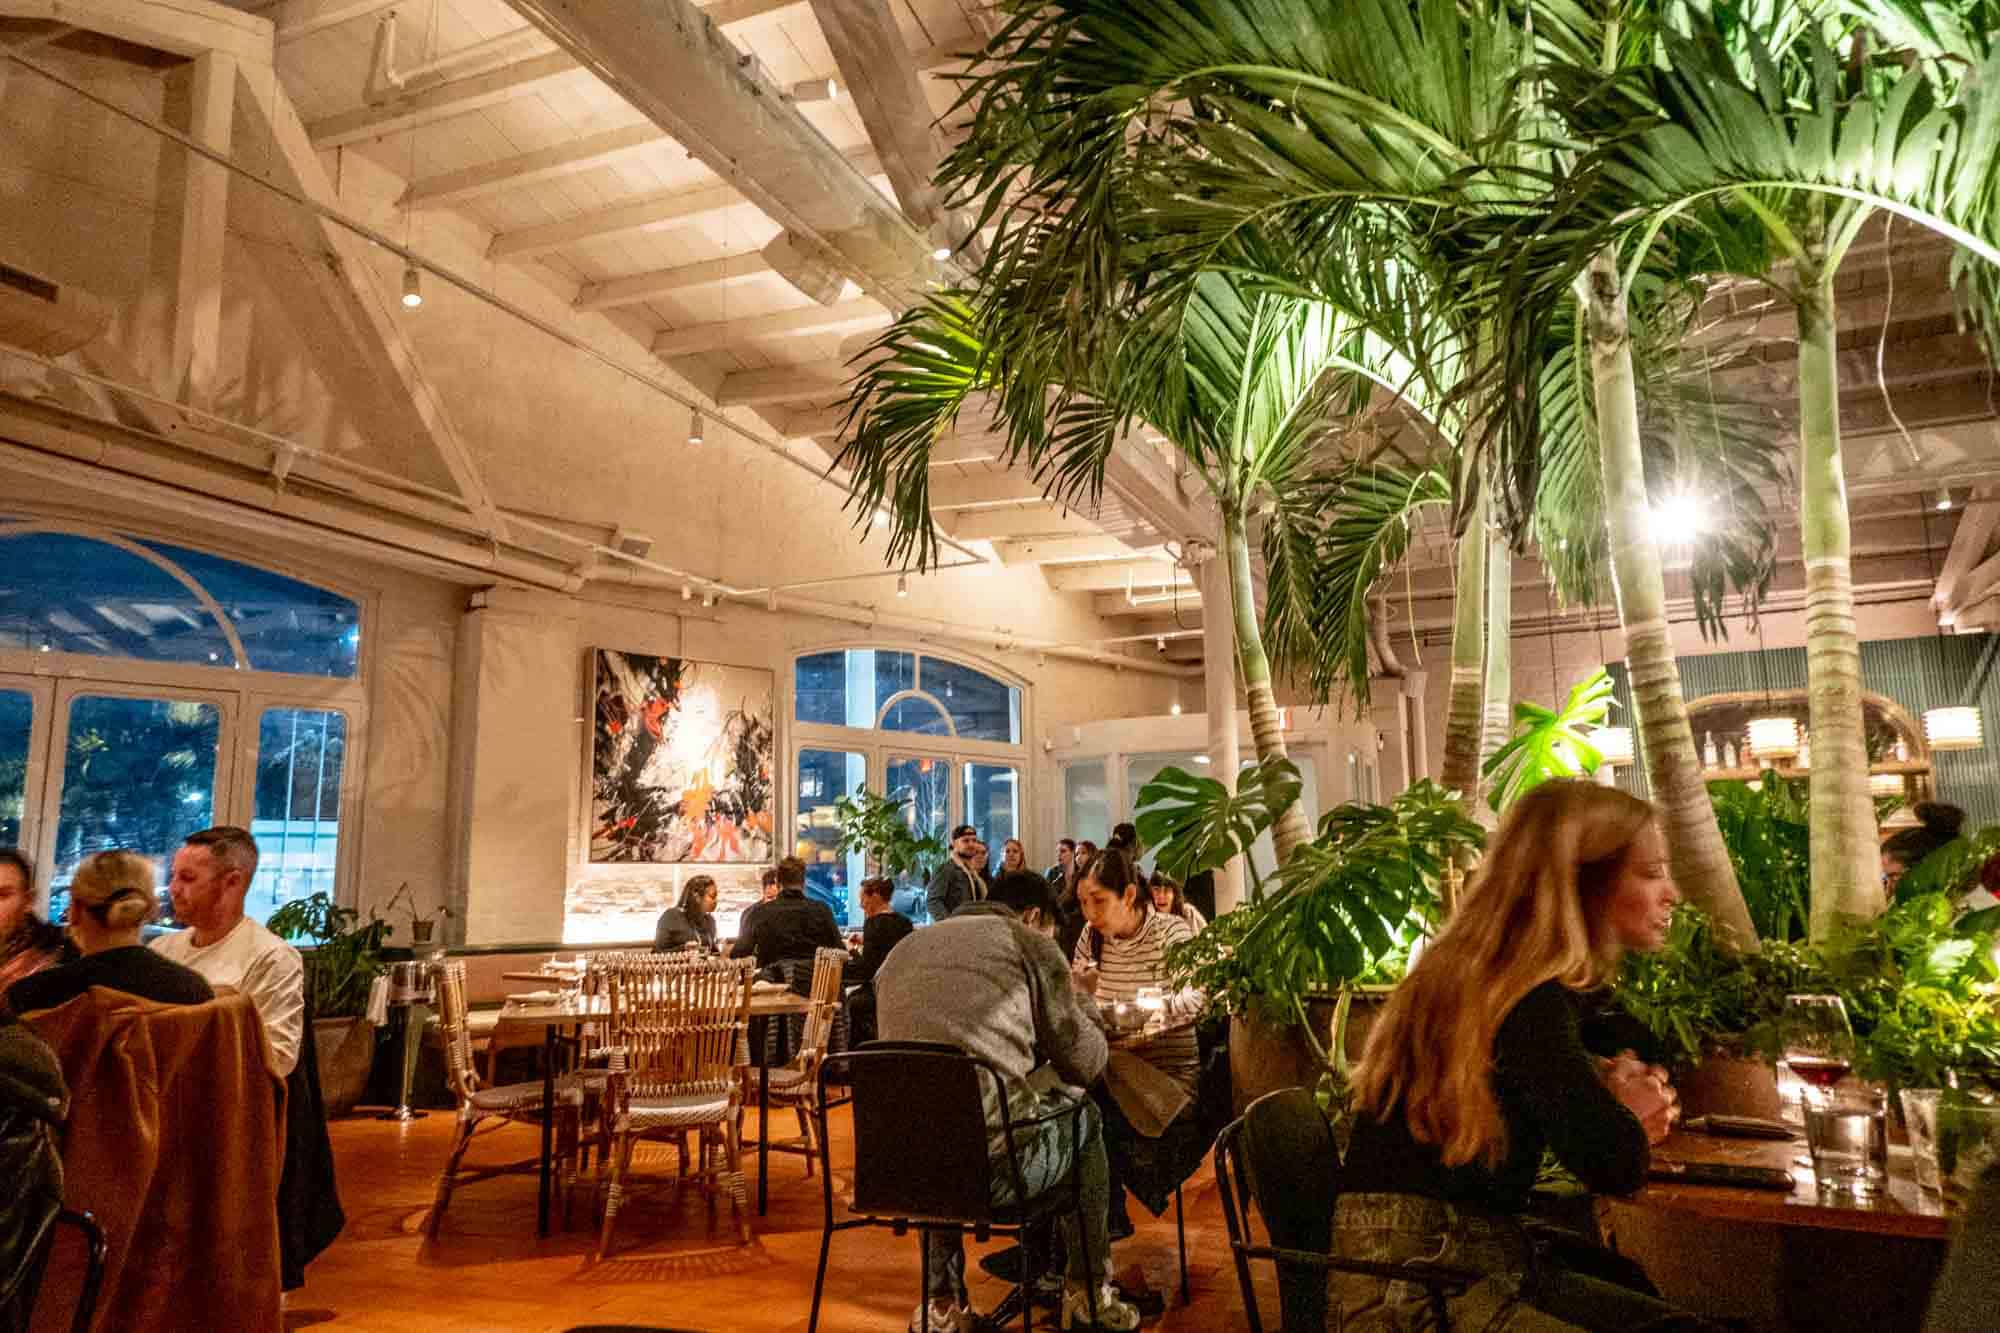 Patrons dining at Kalaya in Fishtown, with palm trees in the center of the restaurant